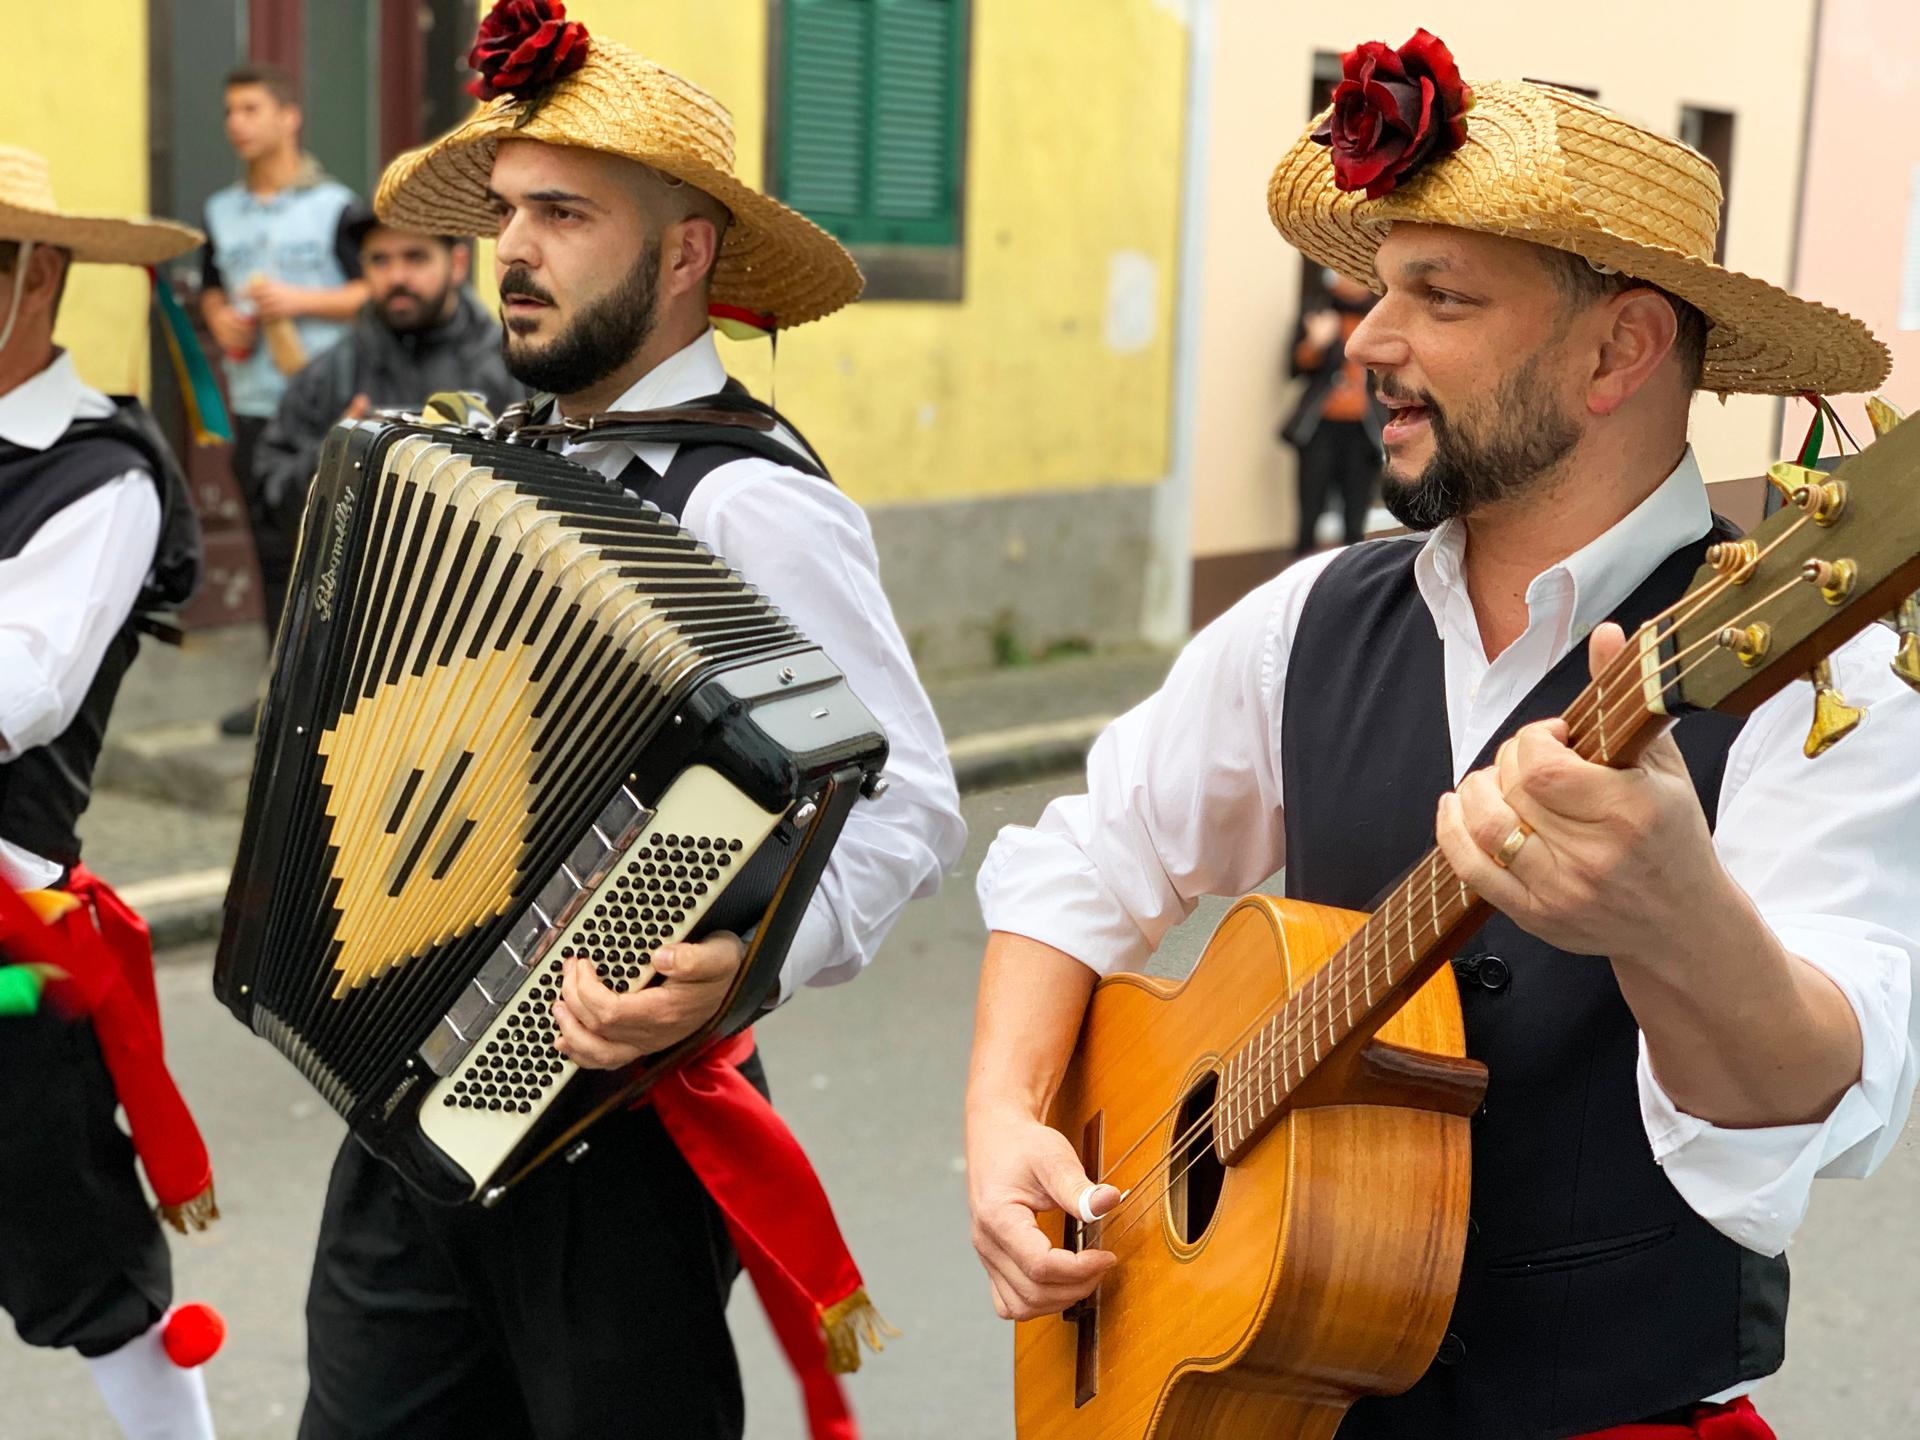 Musicians walk down the street in hats. One plays a guitar, one an accordion.